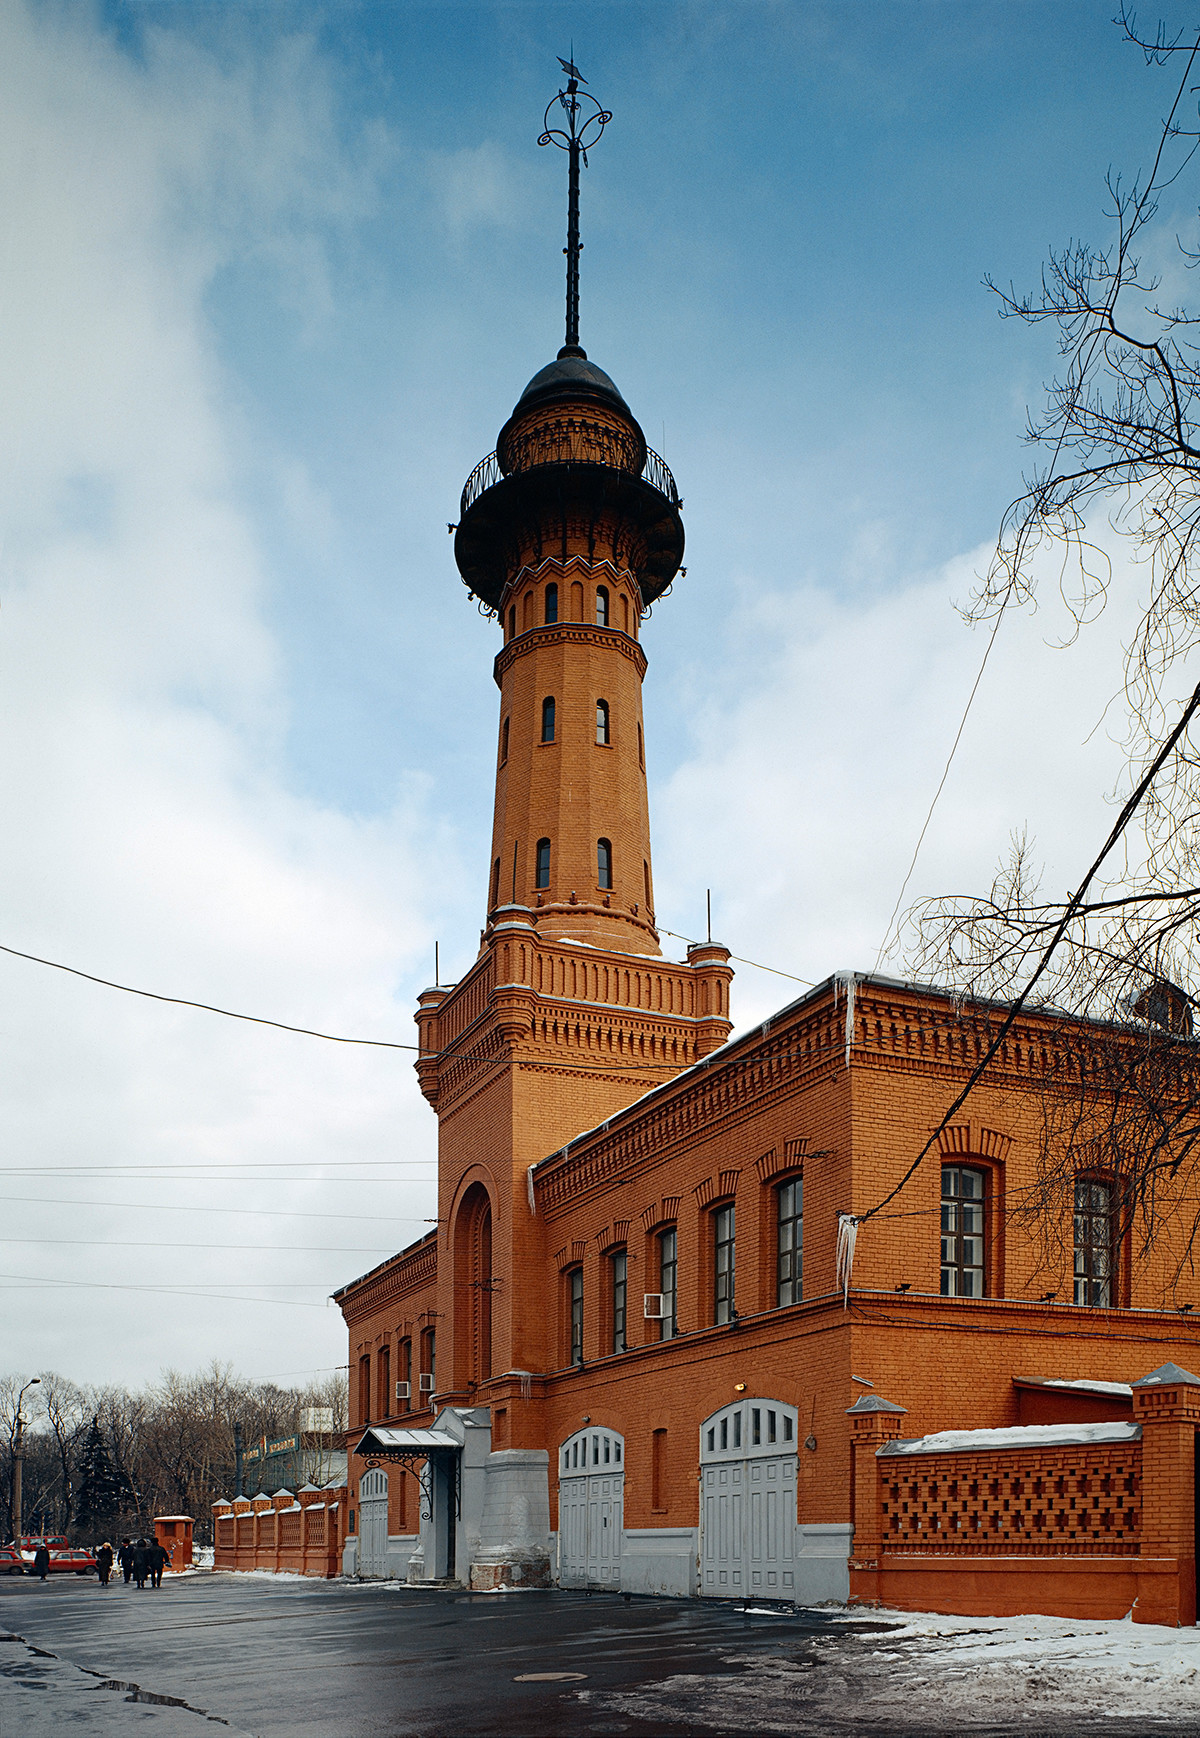 Police fire station with a tower-tower in Sokolniki